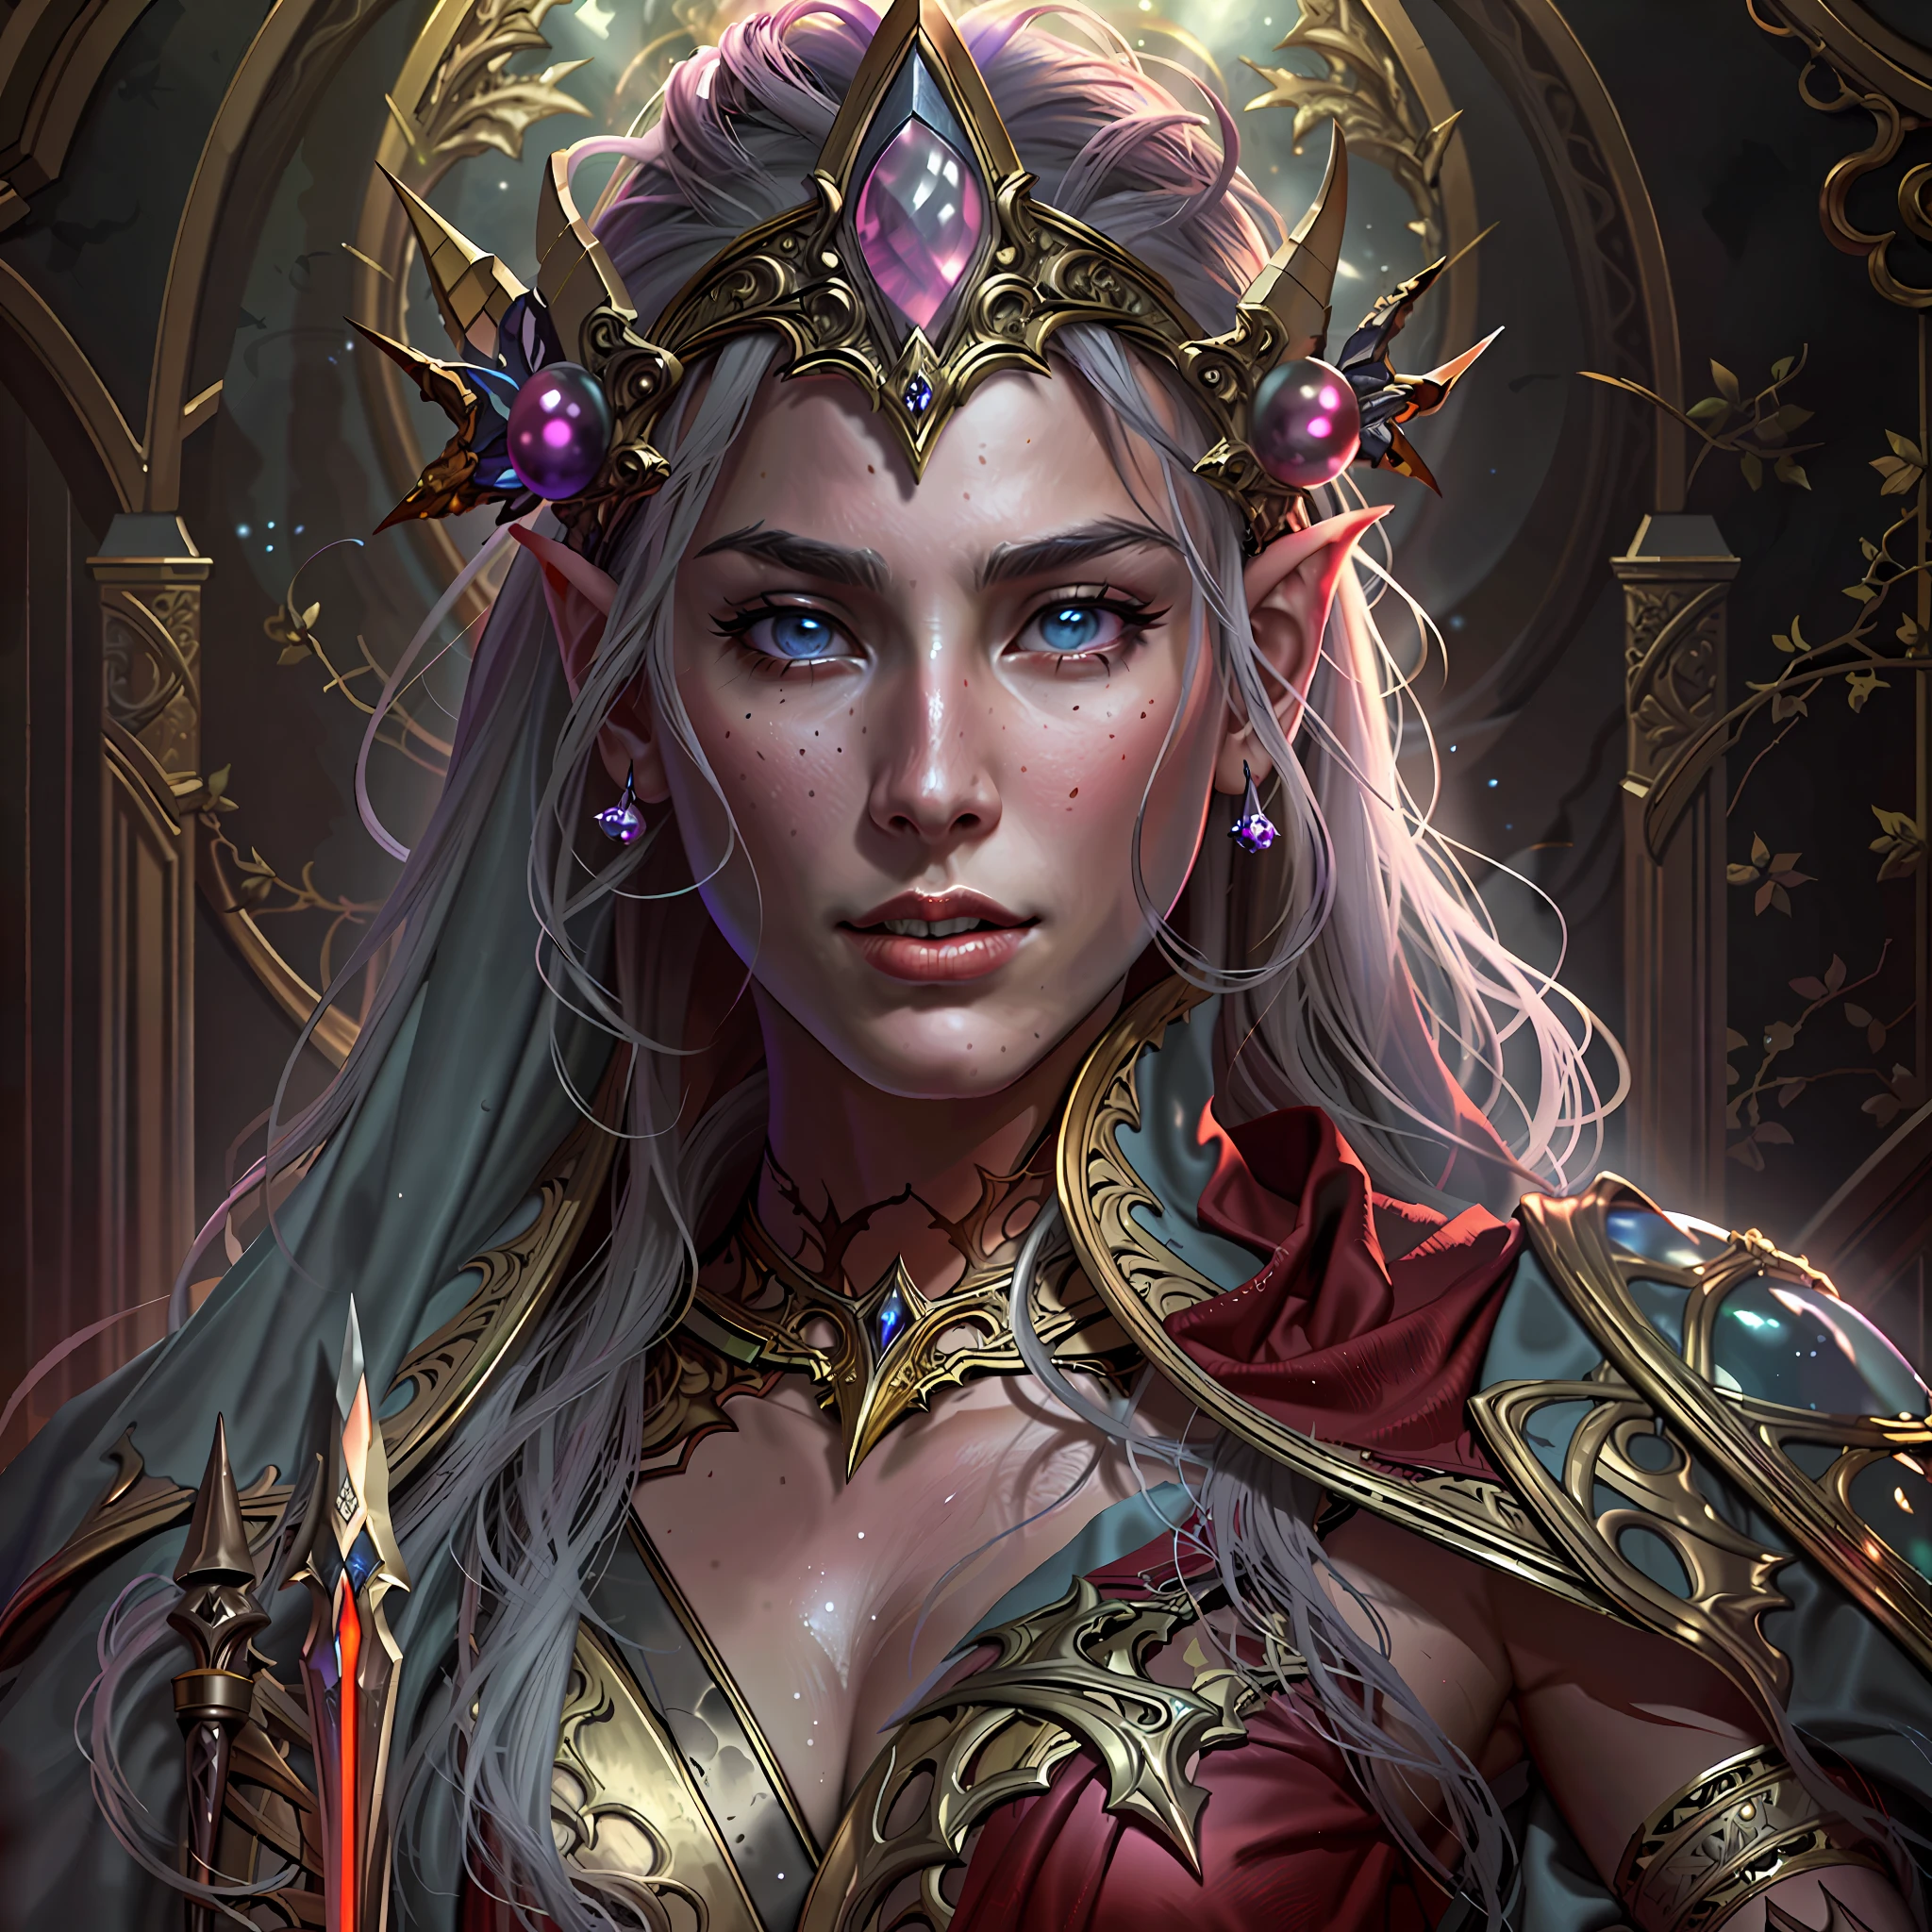 high details, best quality, 8k, [ultra detailed], masterpiece, best quality, (extremely detailed), dynamic angle, ultra wide shot, photorealistic, fantasy art, dnd art, rpg art, realistic art, a wide angle picture of an epic female elf, arcane warrior, warrior of magic, fighter of the arcana, full body, [[anatomically correct]] full body (intricate details, Masterpiece, best quality: 1.5) casting a spell (intricate details, Masterpiece, best quality: 1.5), casting an epic spell, [colorful magical sigils in the air],[ colorful arcane markings floating] (intricate details, Masterpiece, best quality: 1.5), holding an [epic magical sword] (1.5 intricate details, Masterpiece, best quality (intricate details, Masterpiece, best quality: 1.5) holding epic [magical sword glowing in red light(intricate details, Masterpiece, best quality: 1.5). in fantasy urban street),(intricate details, Masterpiece, best quality: 1.5), a female beautiful epic elf wearing elven leather armor(intricate details, Masterpiece, best quality: 1.5), high heeled leather boots, ultra detailed face,  thick hair, long hair, dynamic hair, fair skin intense eyes, fantasy city background (intense details), sun light, backlight, depth of field (1.4 intricate details, Masterpiece, best quality), dynamic angle, (intricate details, Masterpiece, best quality: 1.5), high details, best quality, highres, ultra wide angle